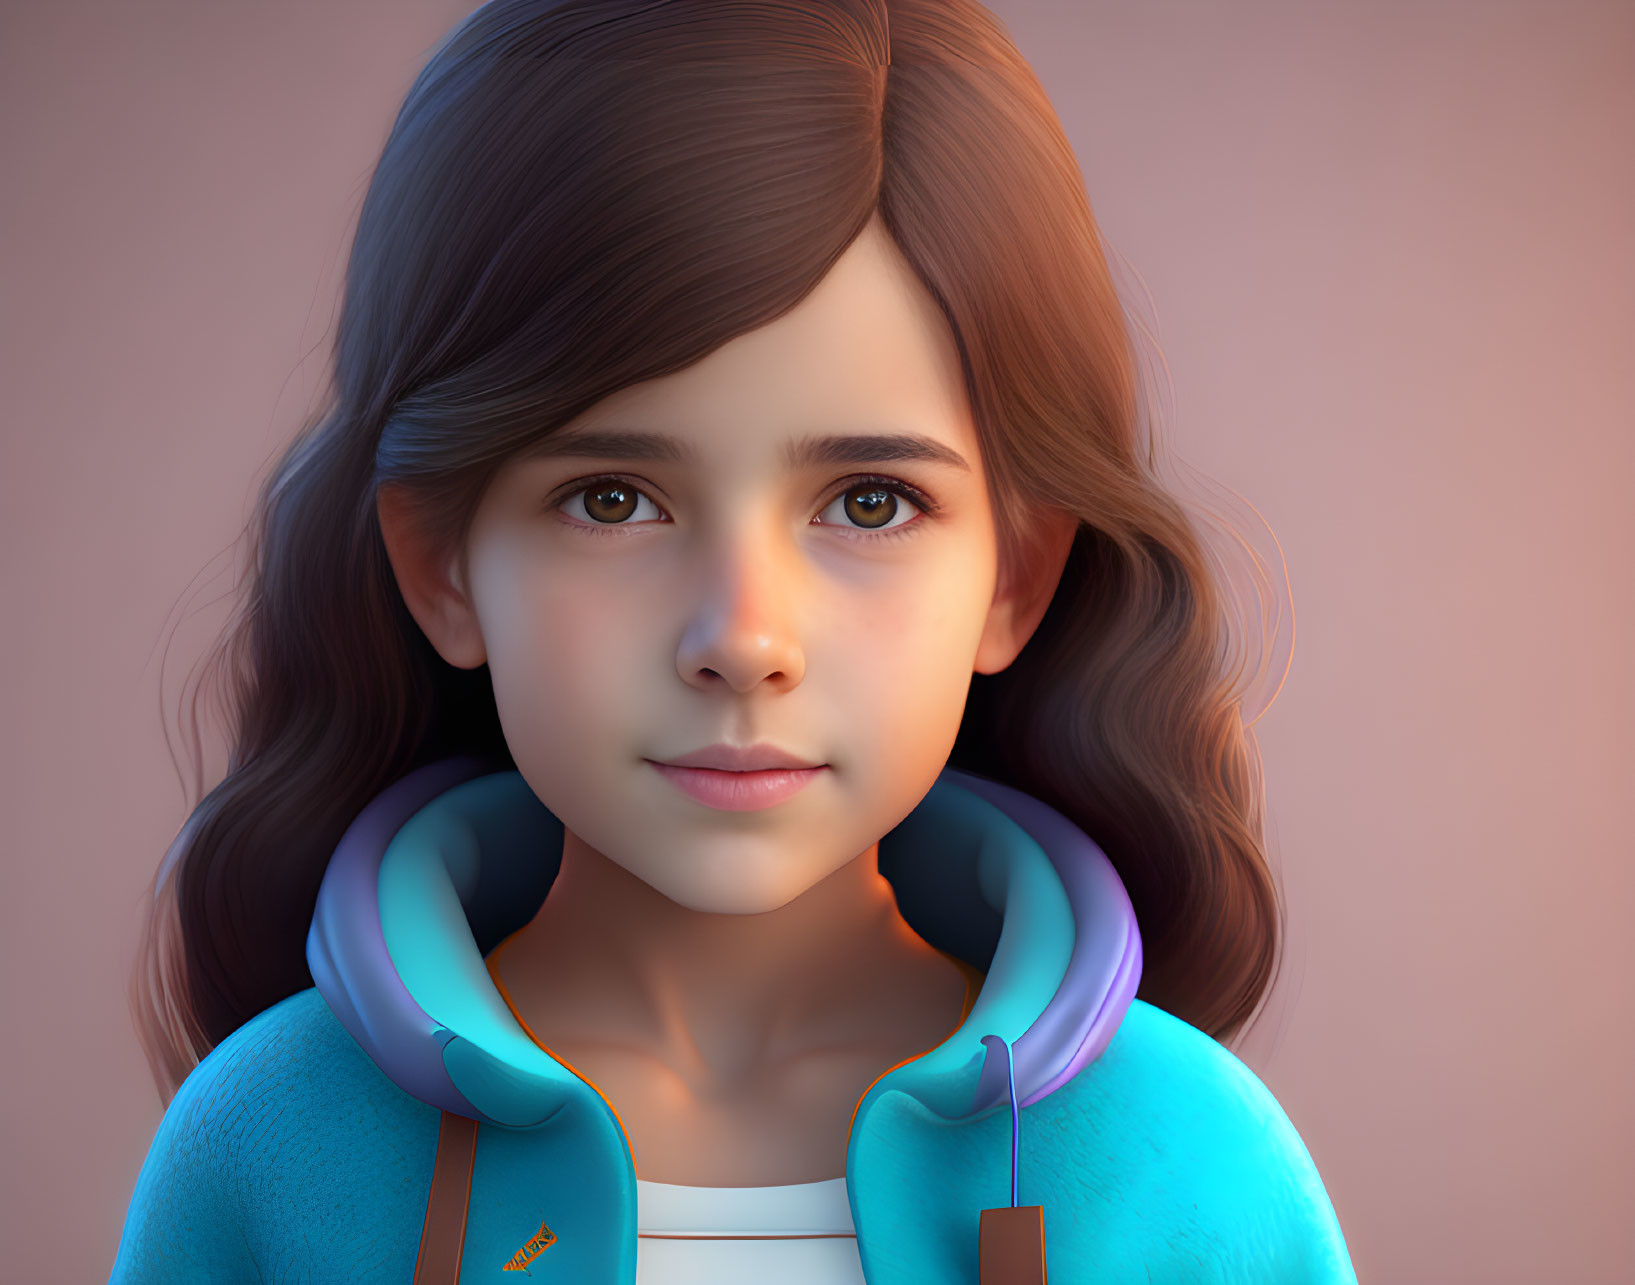 Digital artwork: Young girl with brown hair, large eyes, blue hoodie, realistic textures, soft lighting